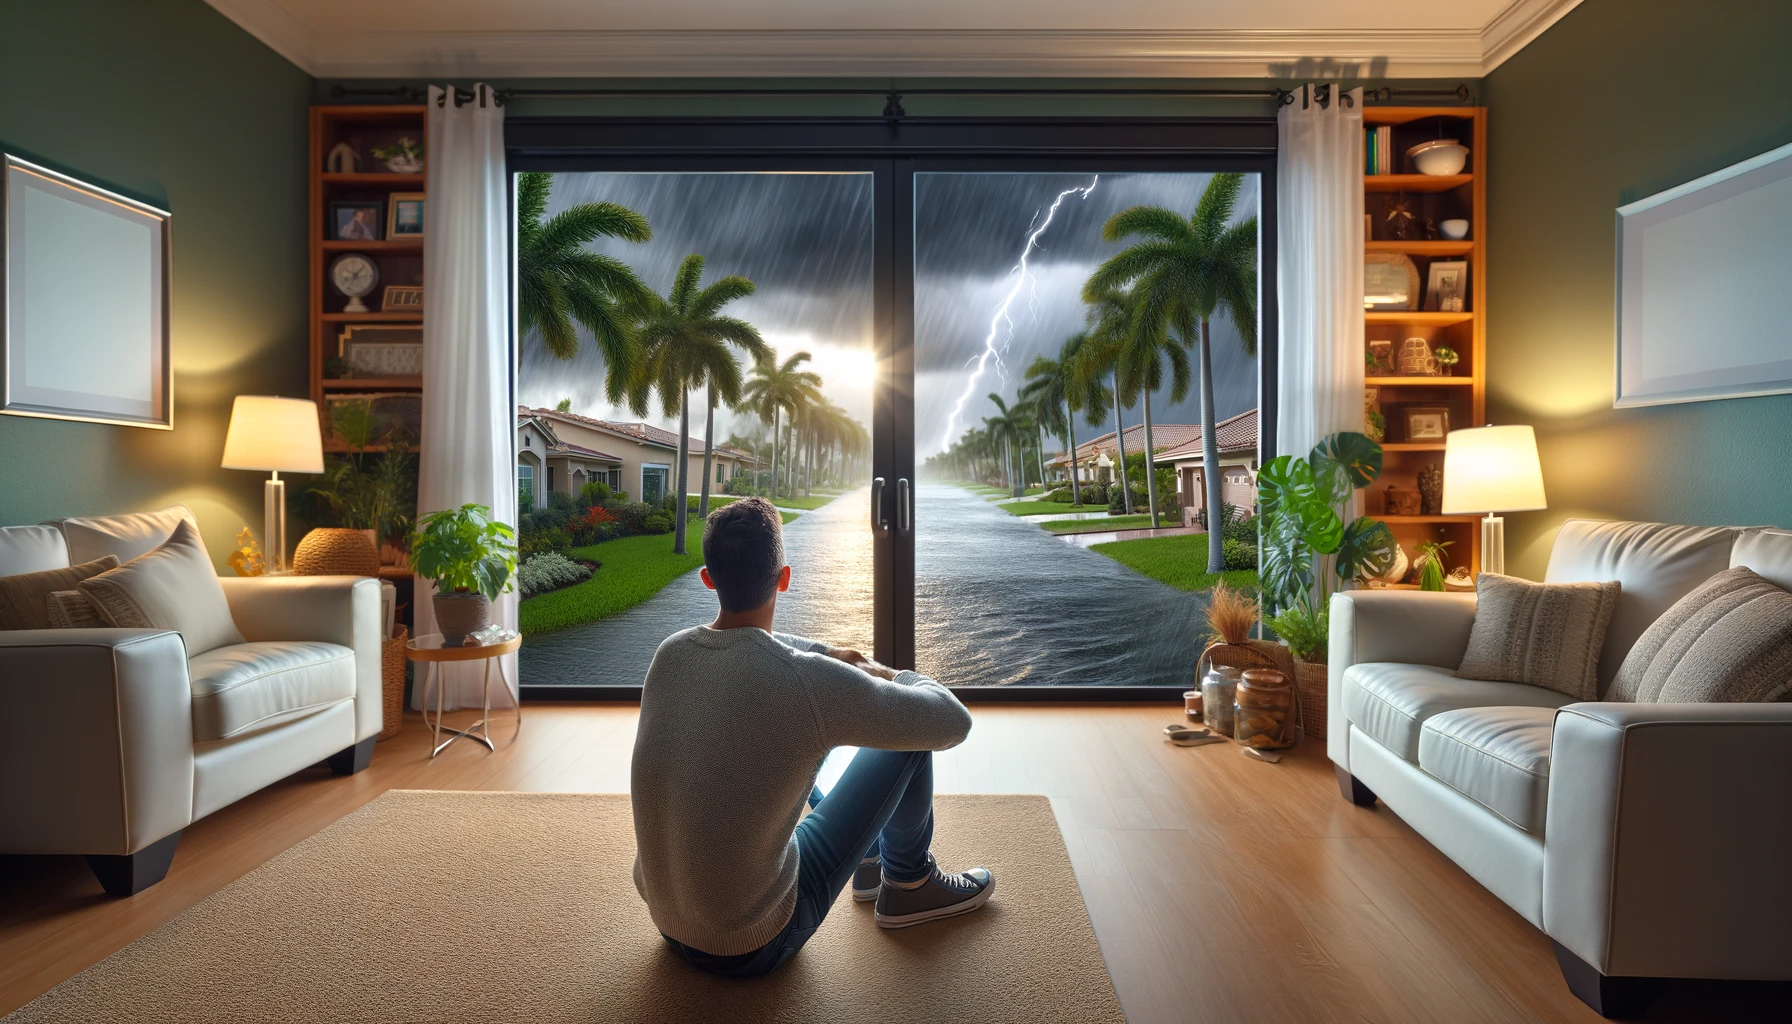 DALL·E 2024-01-02 15.16.20 - A relieved and secure homeowner of Hispanic descent in Fort Lauderdale, FL, safely inside their home during a storm, thanks to the new impact doors. T